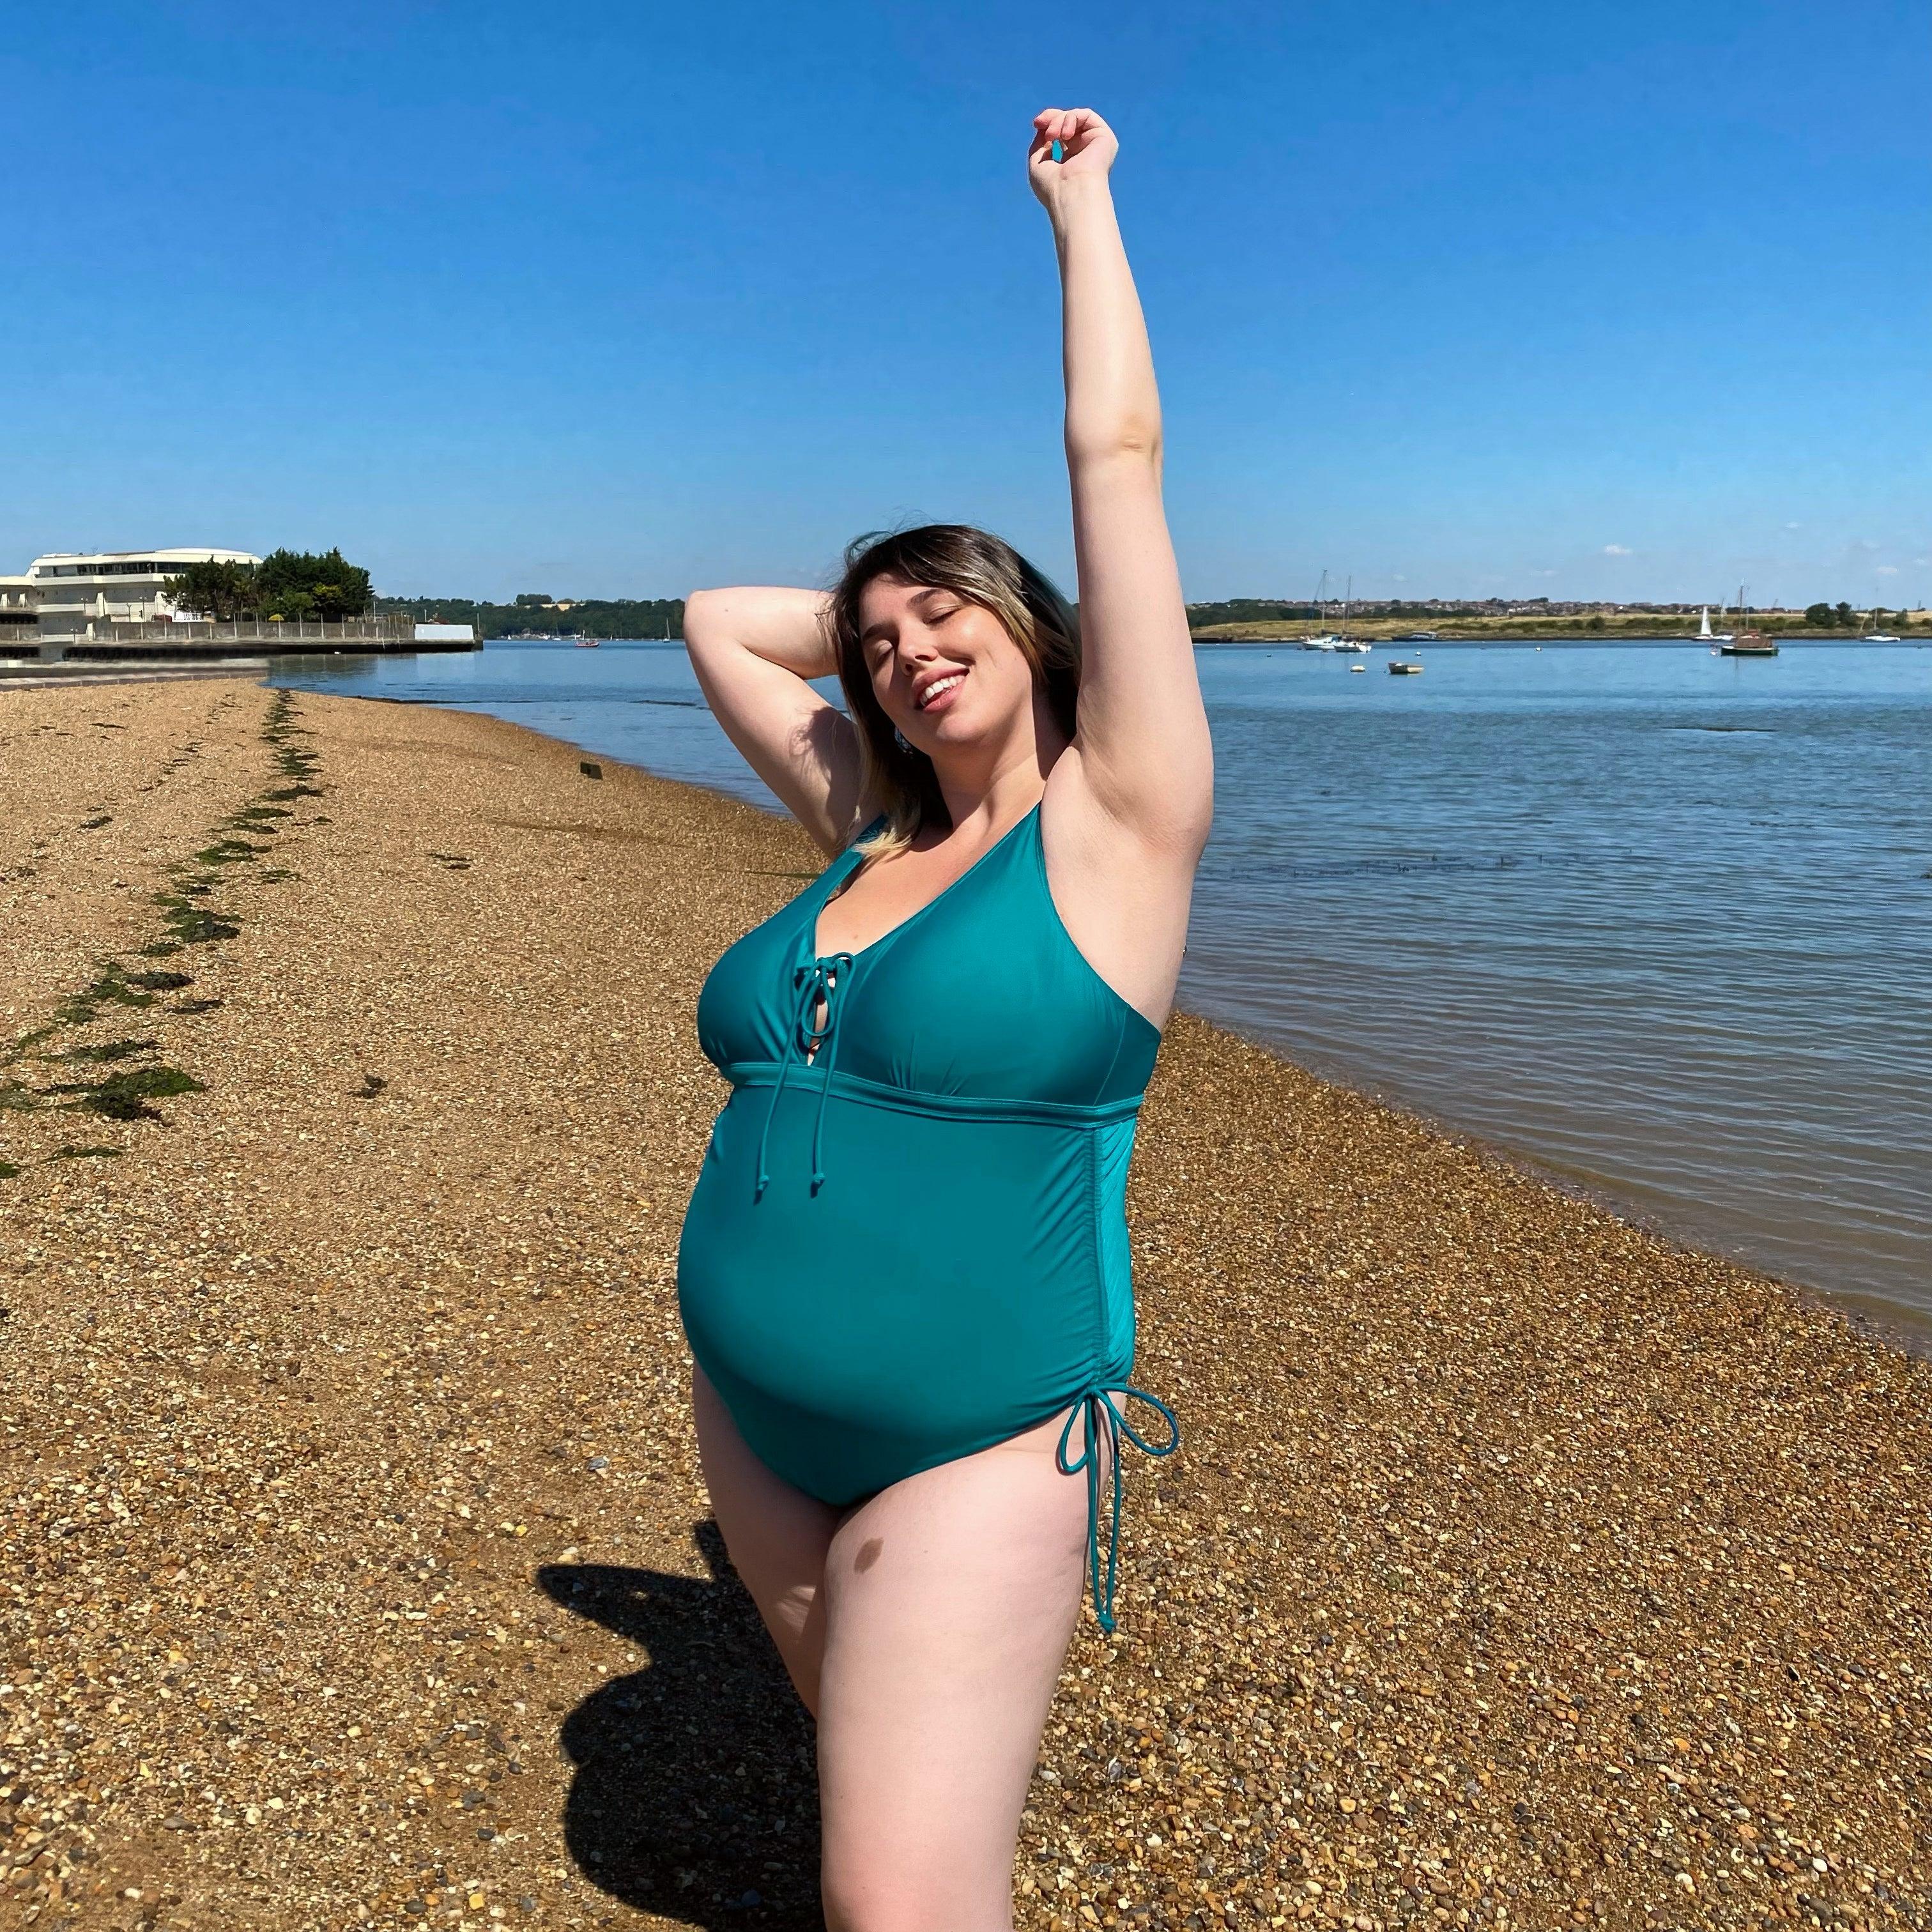 Teal Maternity Swimsuit - That loving feel'in - Snag – Snag US